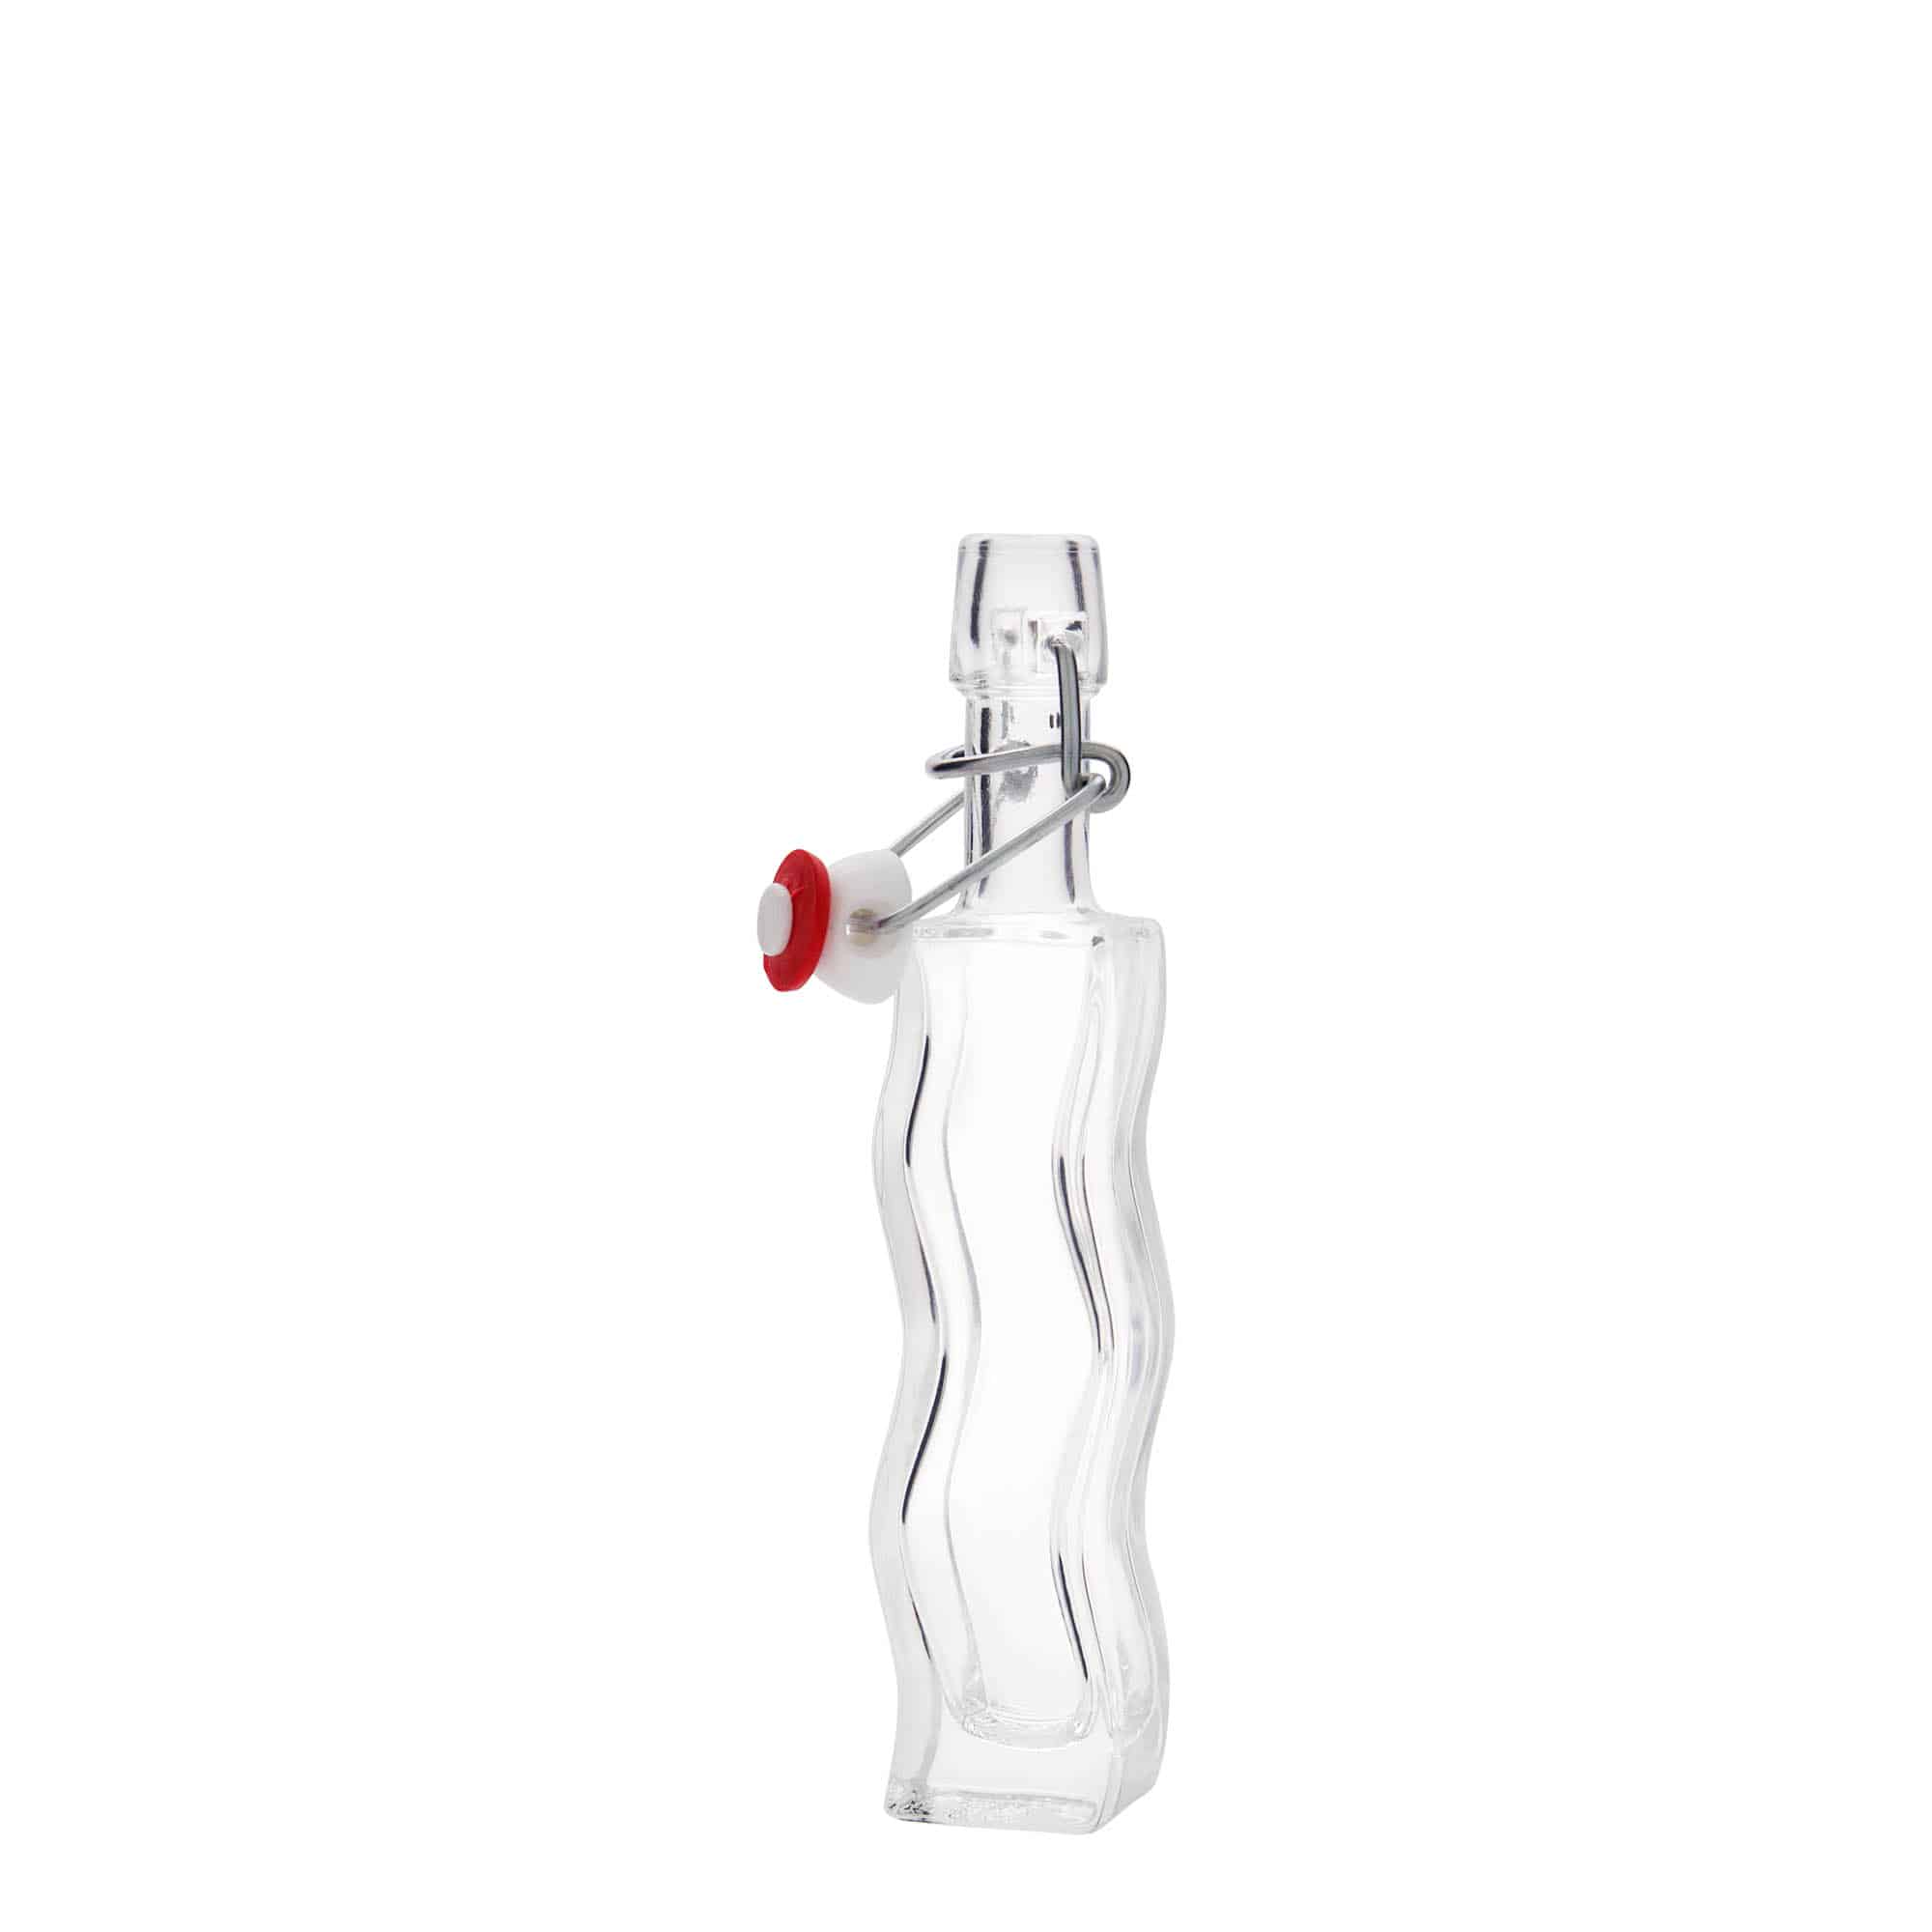 40 ml glass bottle 'Wave', square, closure: swing top